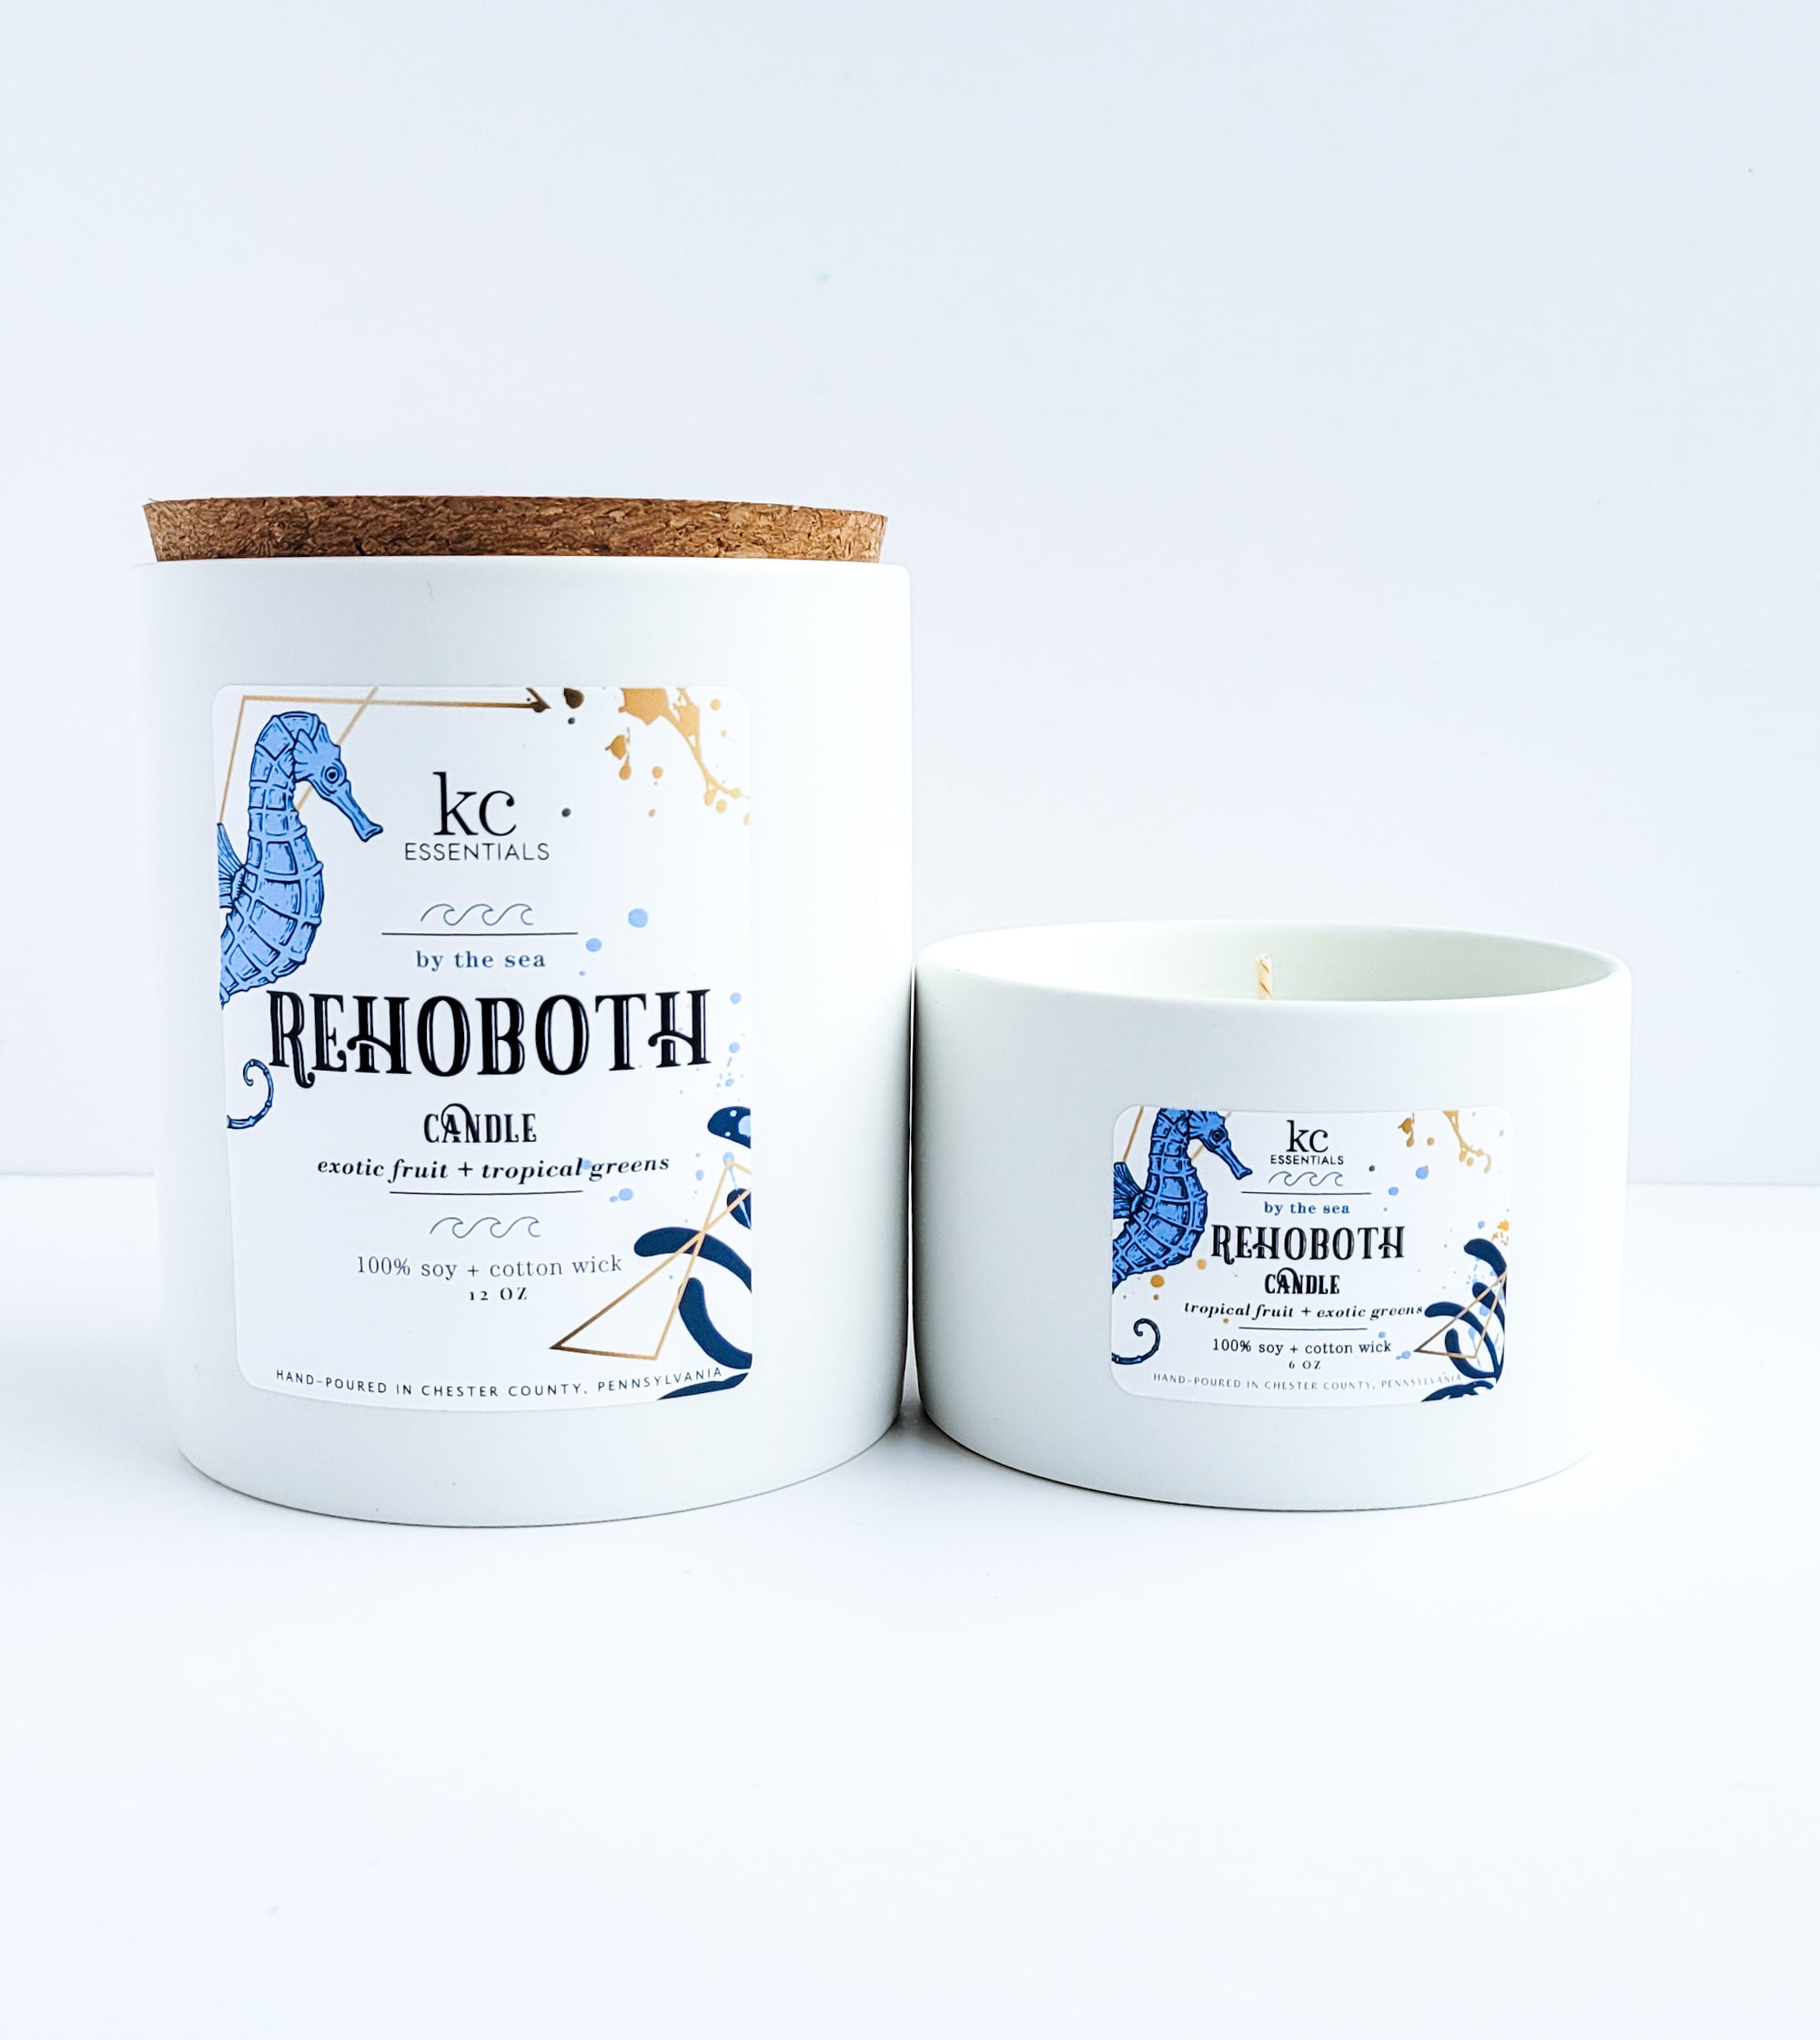 Rehoboth beach 12 ounce candle made with 100 percent soy, includes cork lid.